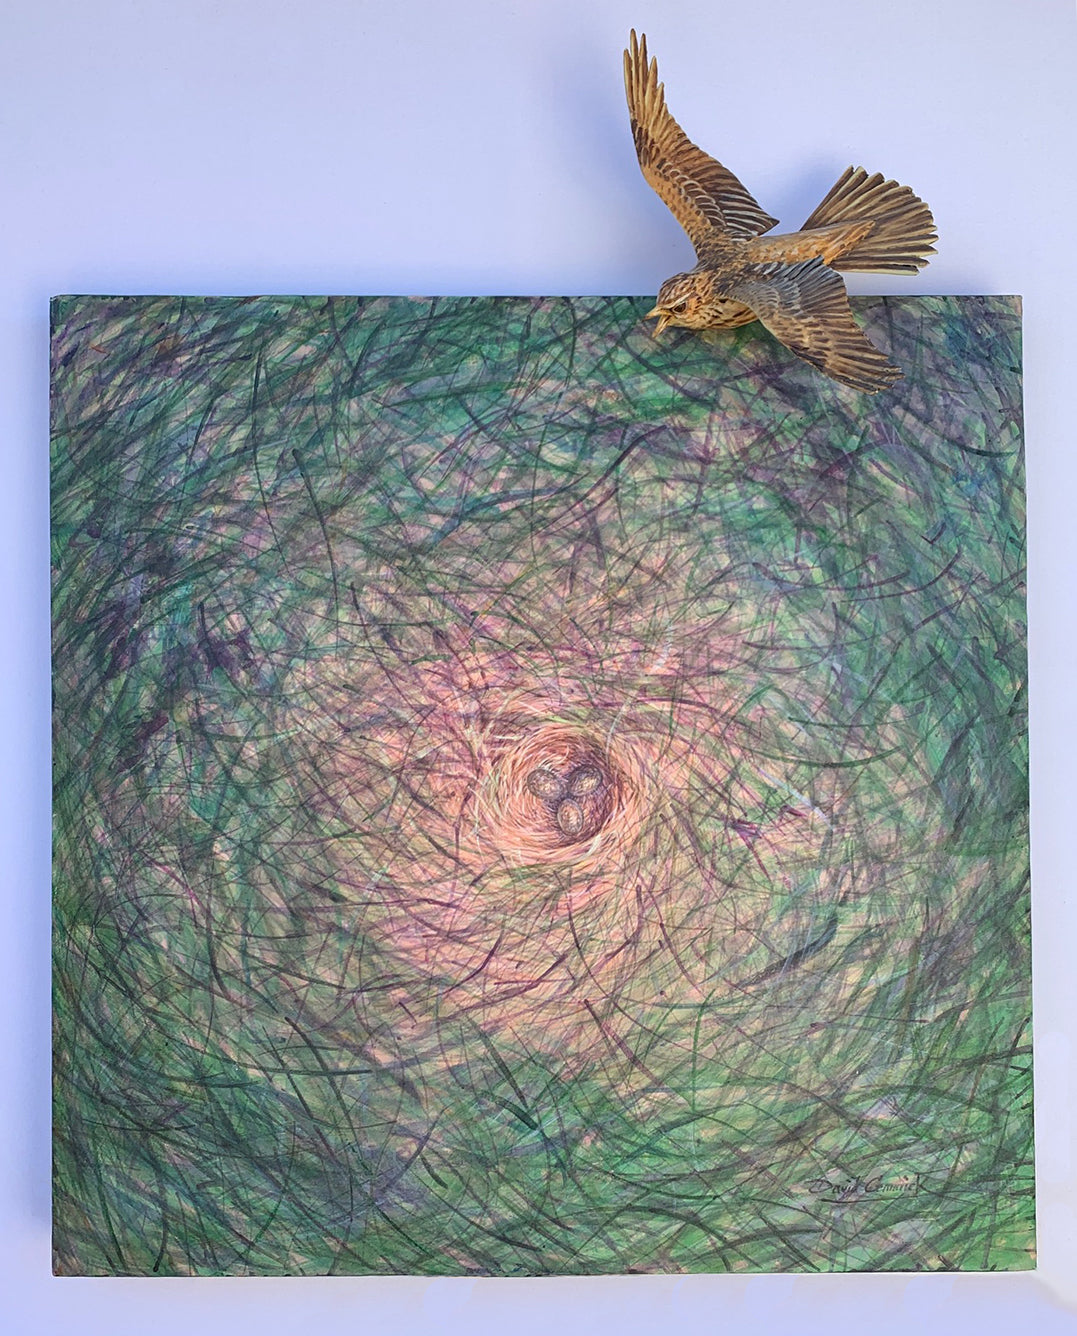 'The lark in the morning’ - Acrylic on canvas with skylark sculpture by David Cemmick - 60 x 60cm